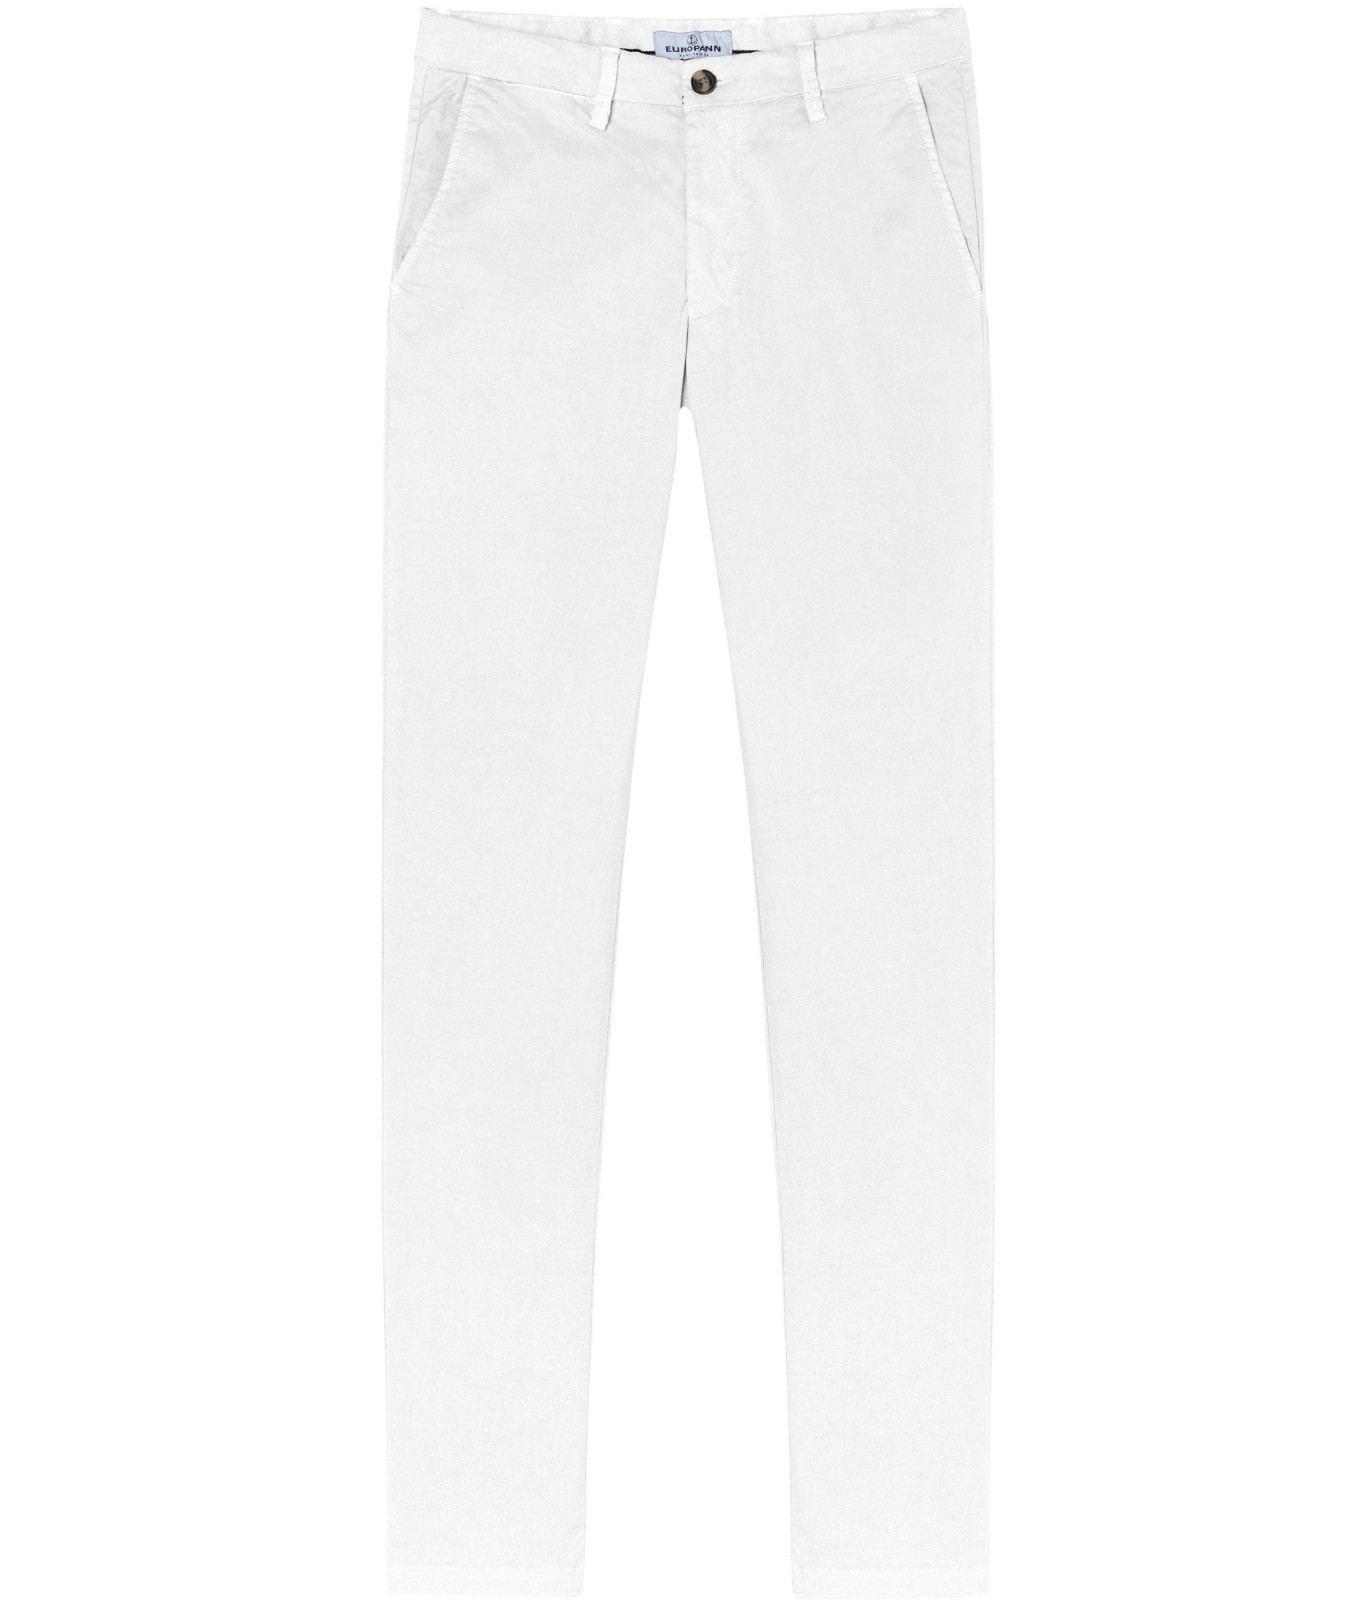 Pants adjusted fit cotton chinos for 